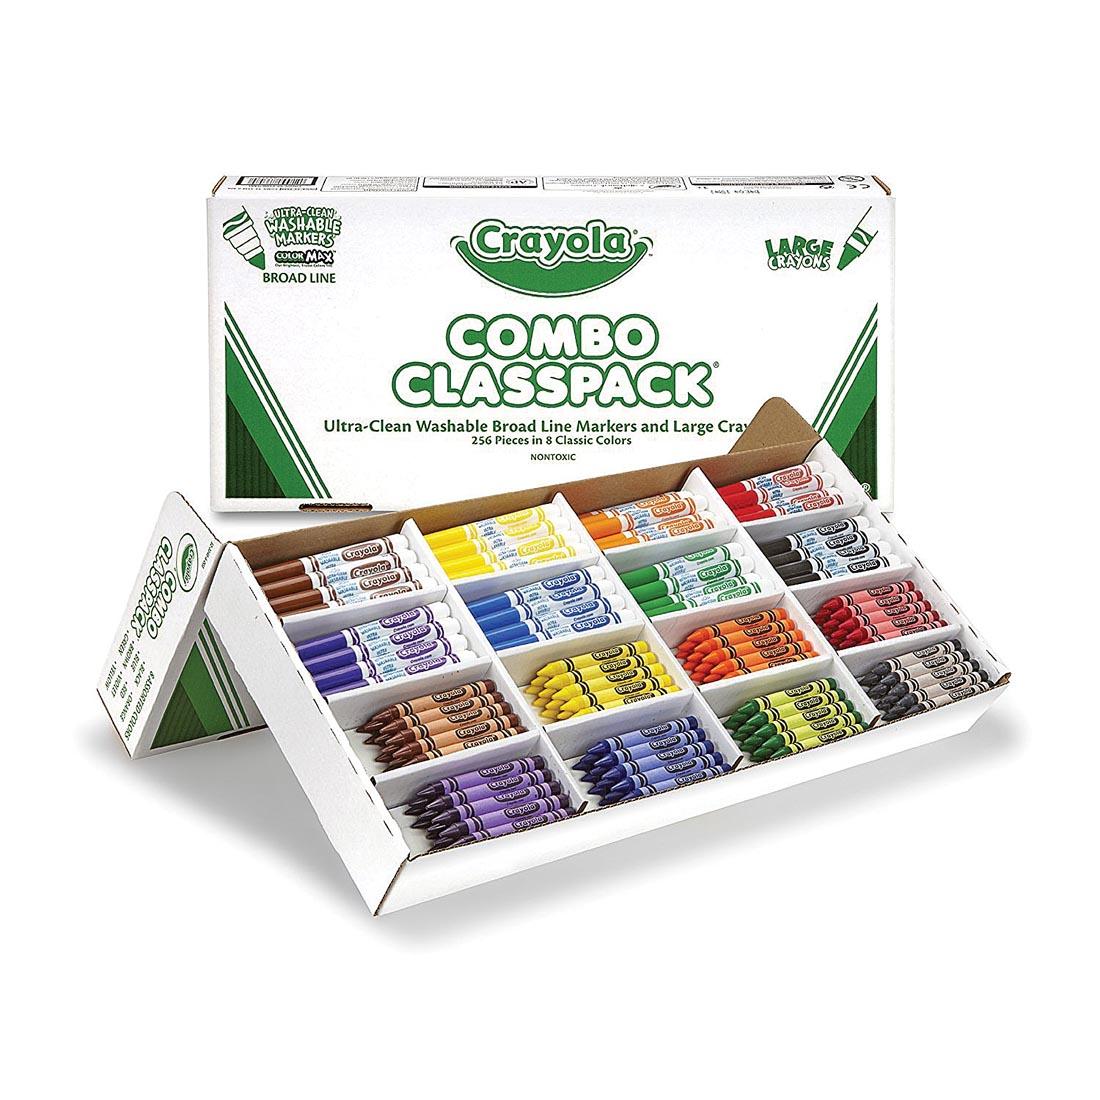 Crayola Combo Crayon and Marker Classpack shown both closed and open